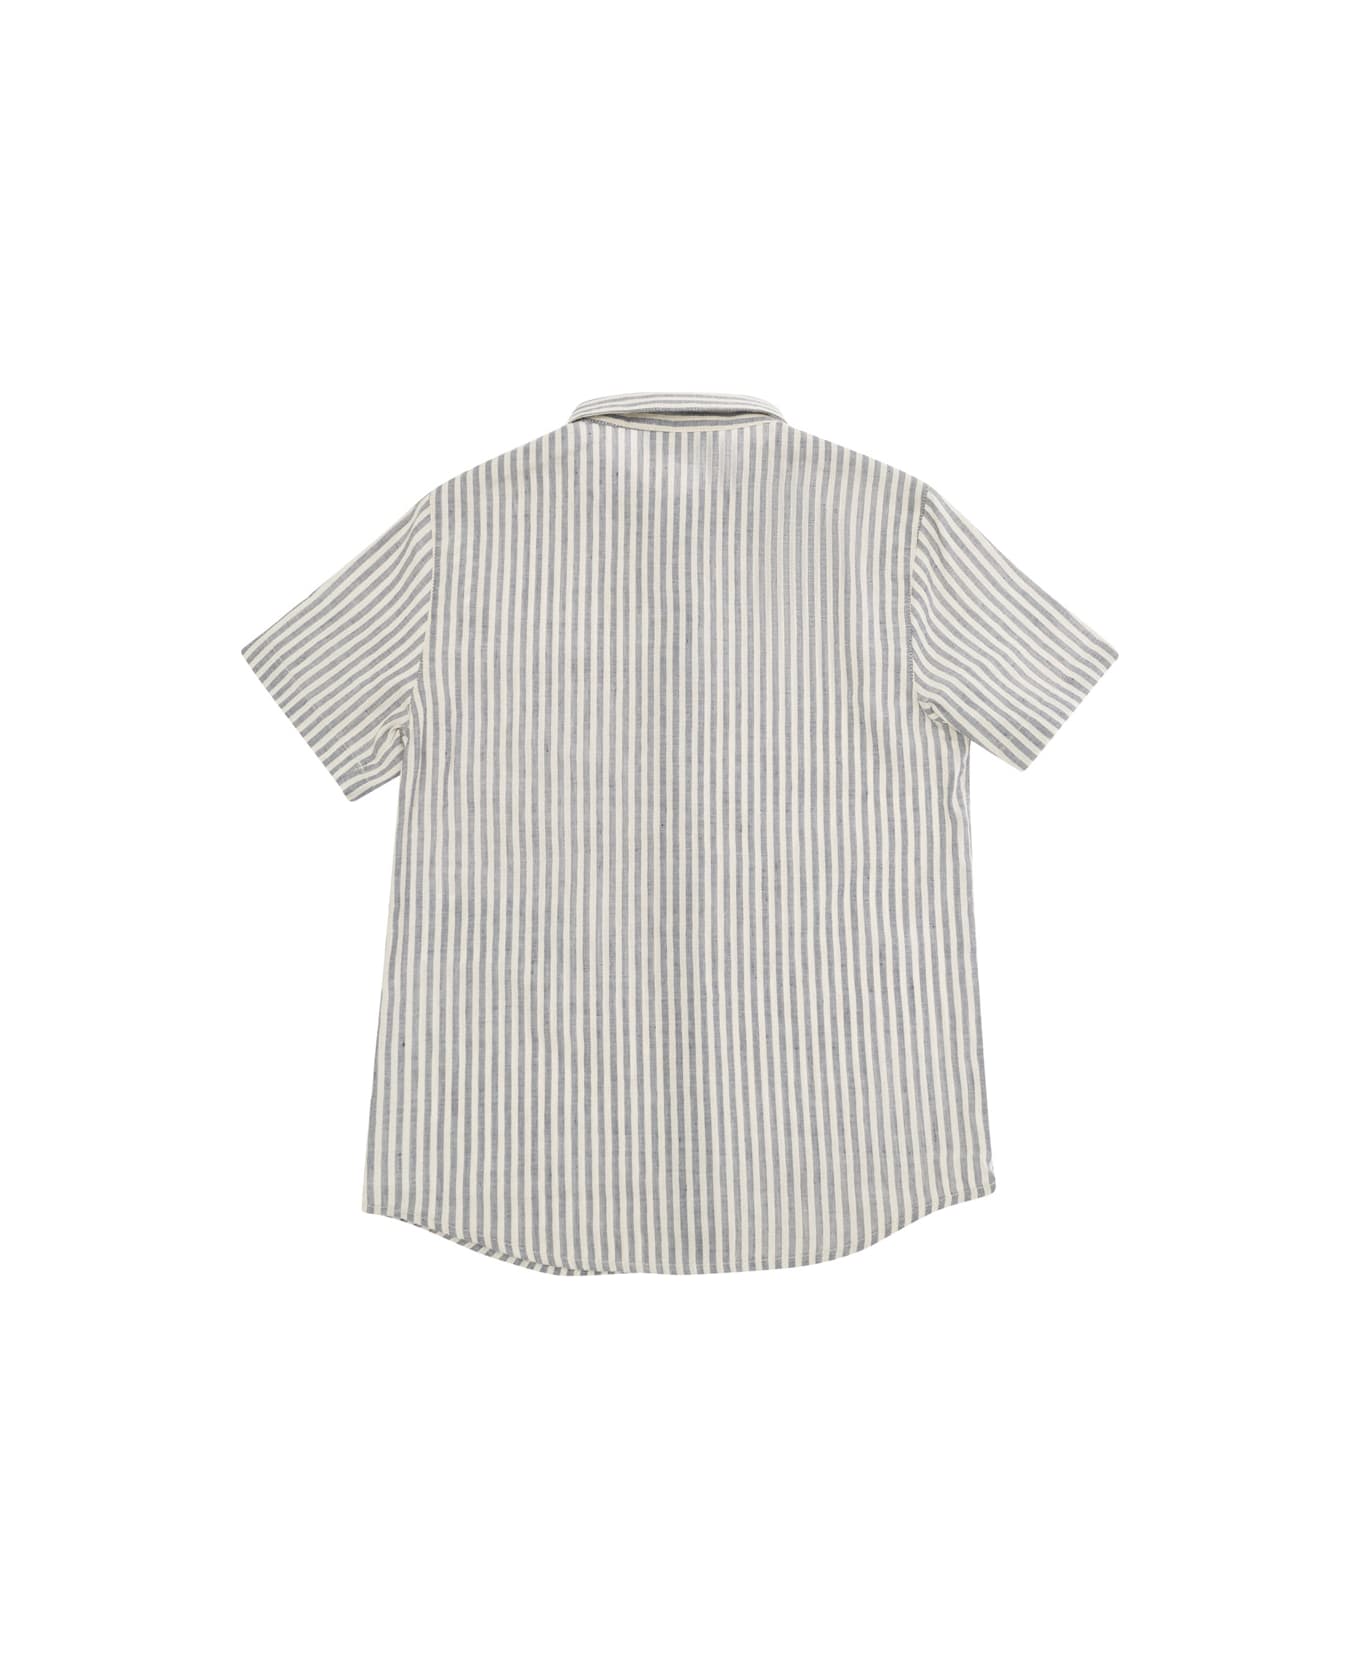 Emporio Armani Grey And White Stripe Shirt With Logo Embroidery In Cotton And Linen Boy - Multicolor シャツ